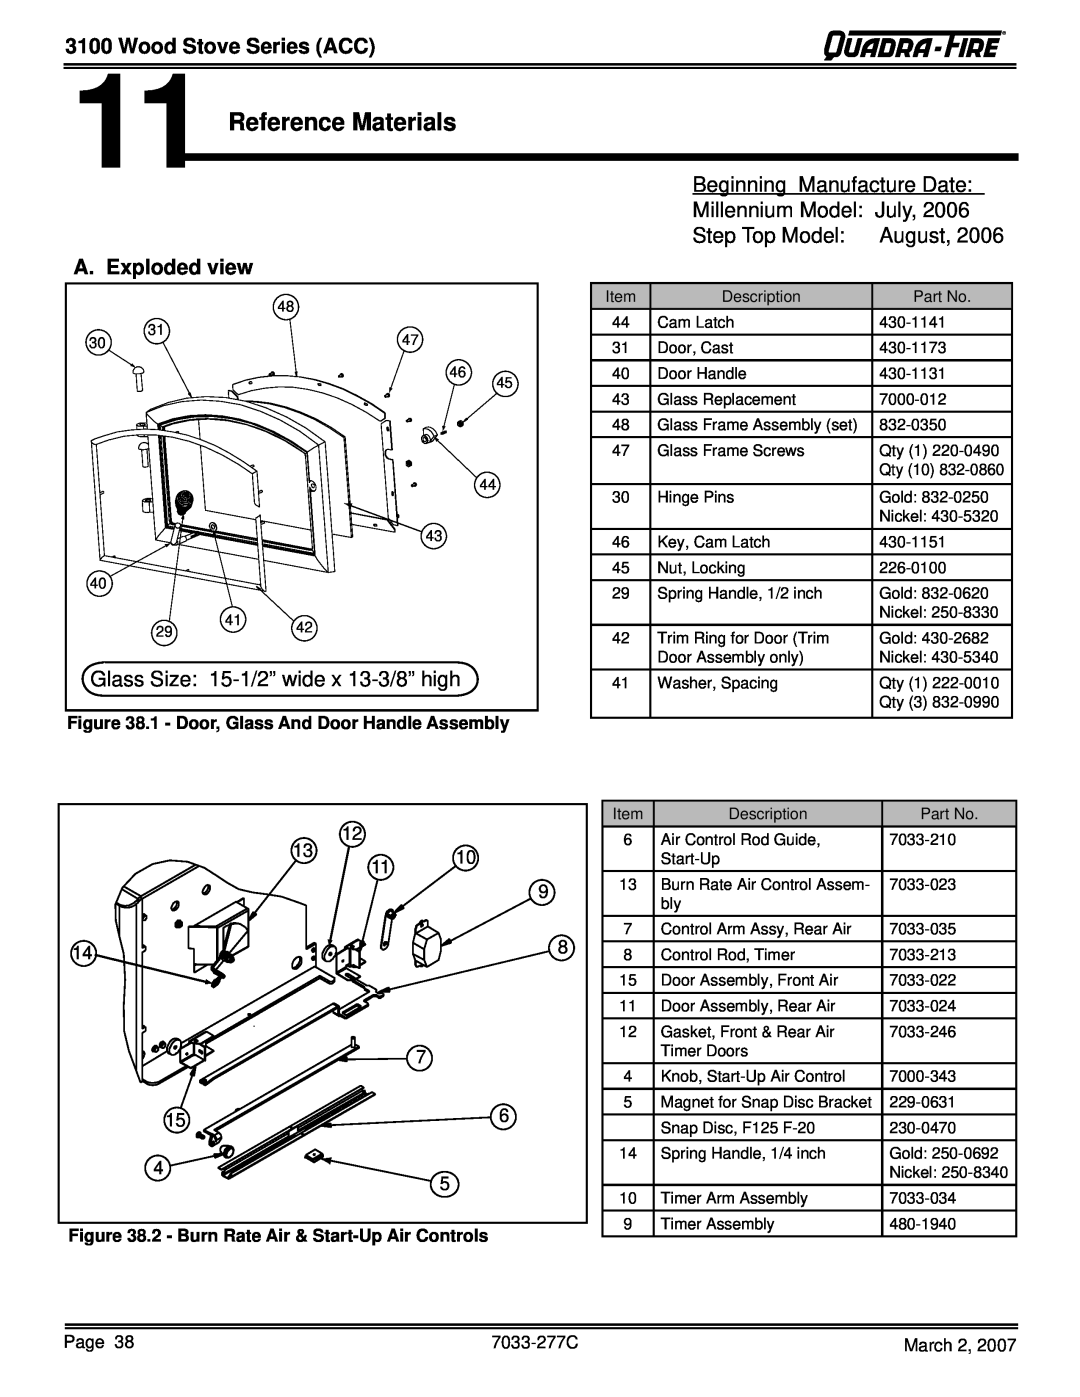 Quadra-Fire 31M-ACC-NT, 31ST-ACC Reference Materials, Wood Stove Series ACC, Beginning Manufacture Date, A. Exploded view 